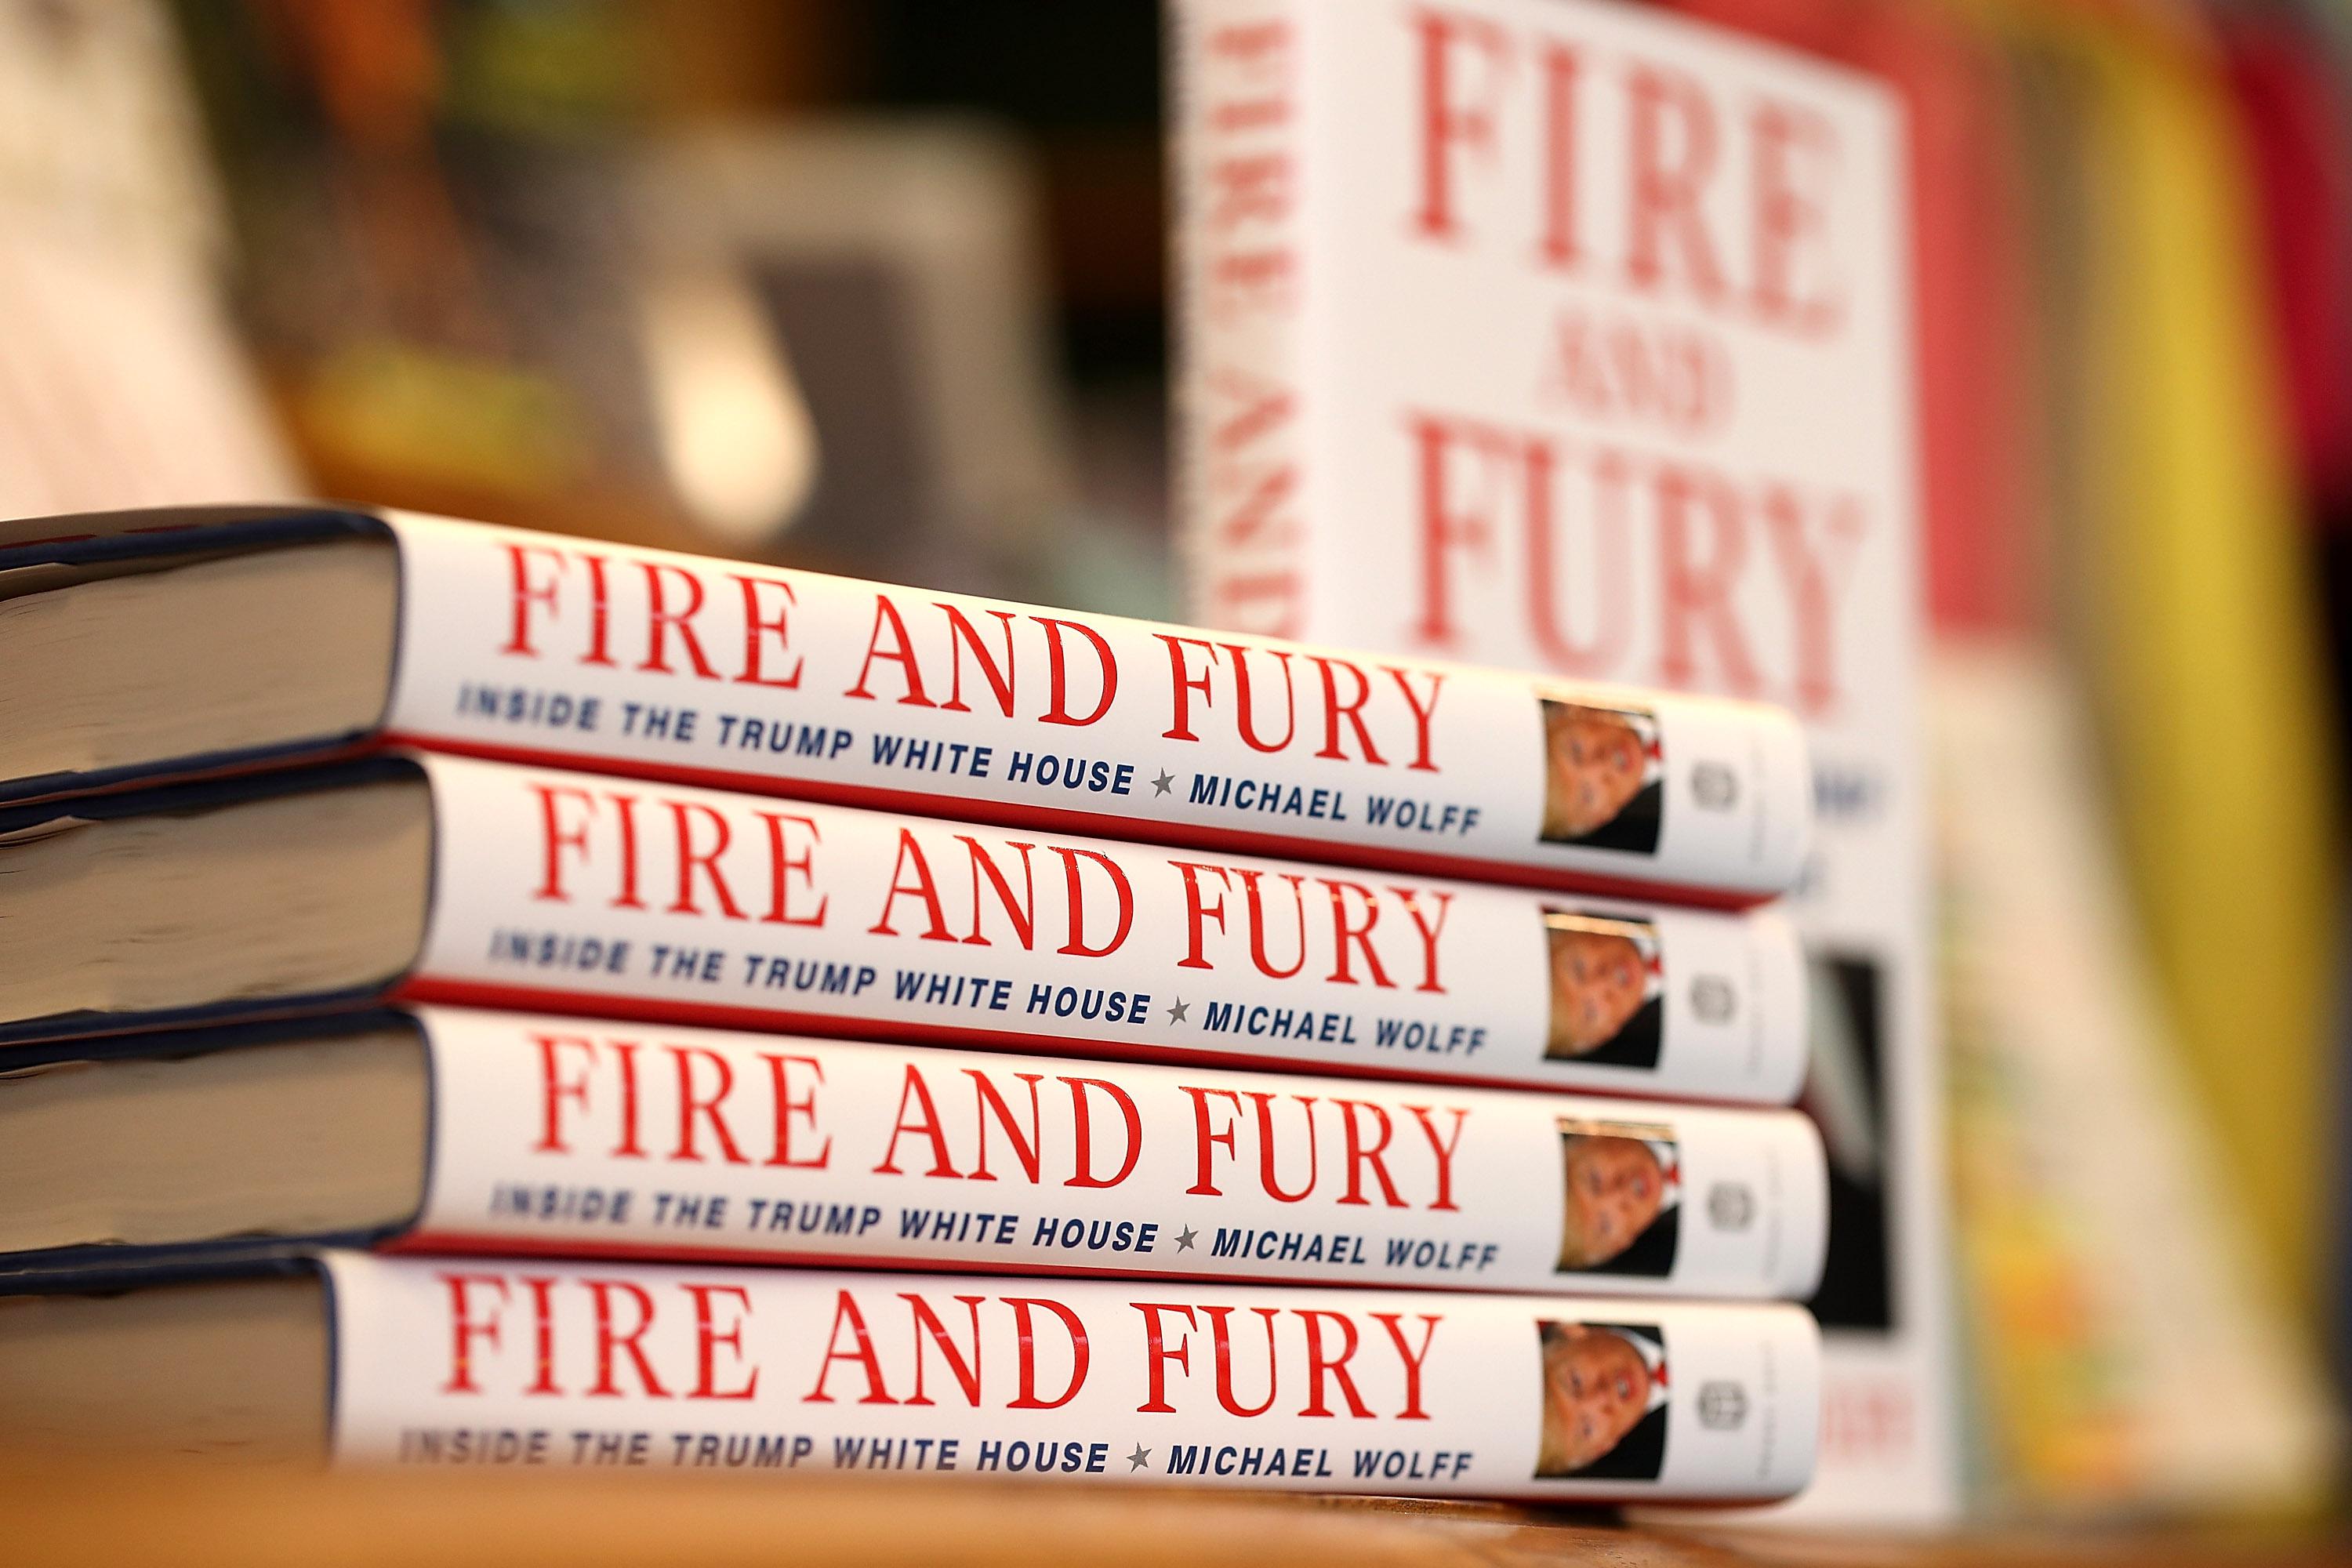 Copies of the book Fire and Fury by author Michael Wolff are displayed on a shelf at a bookstore